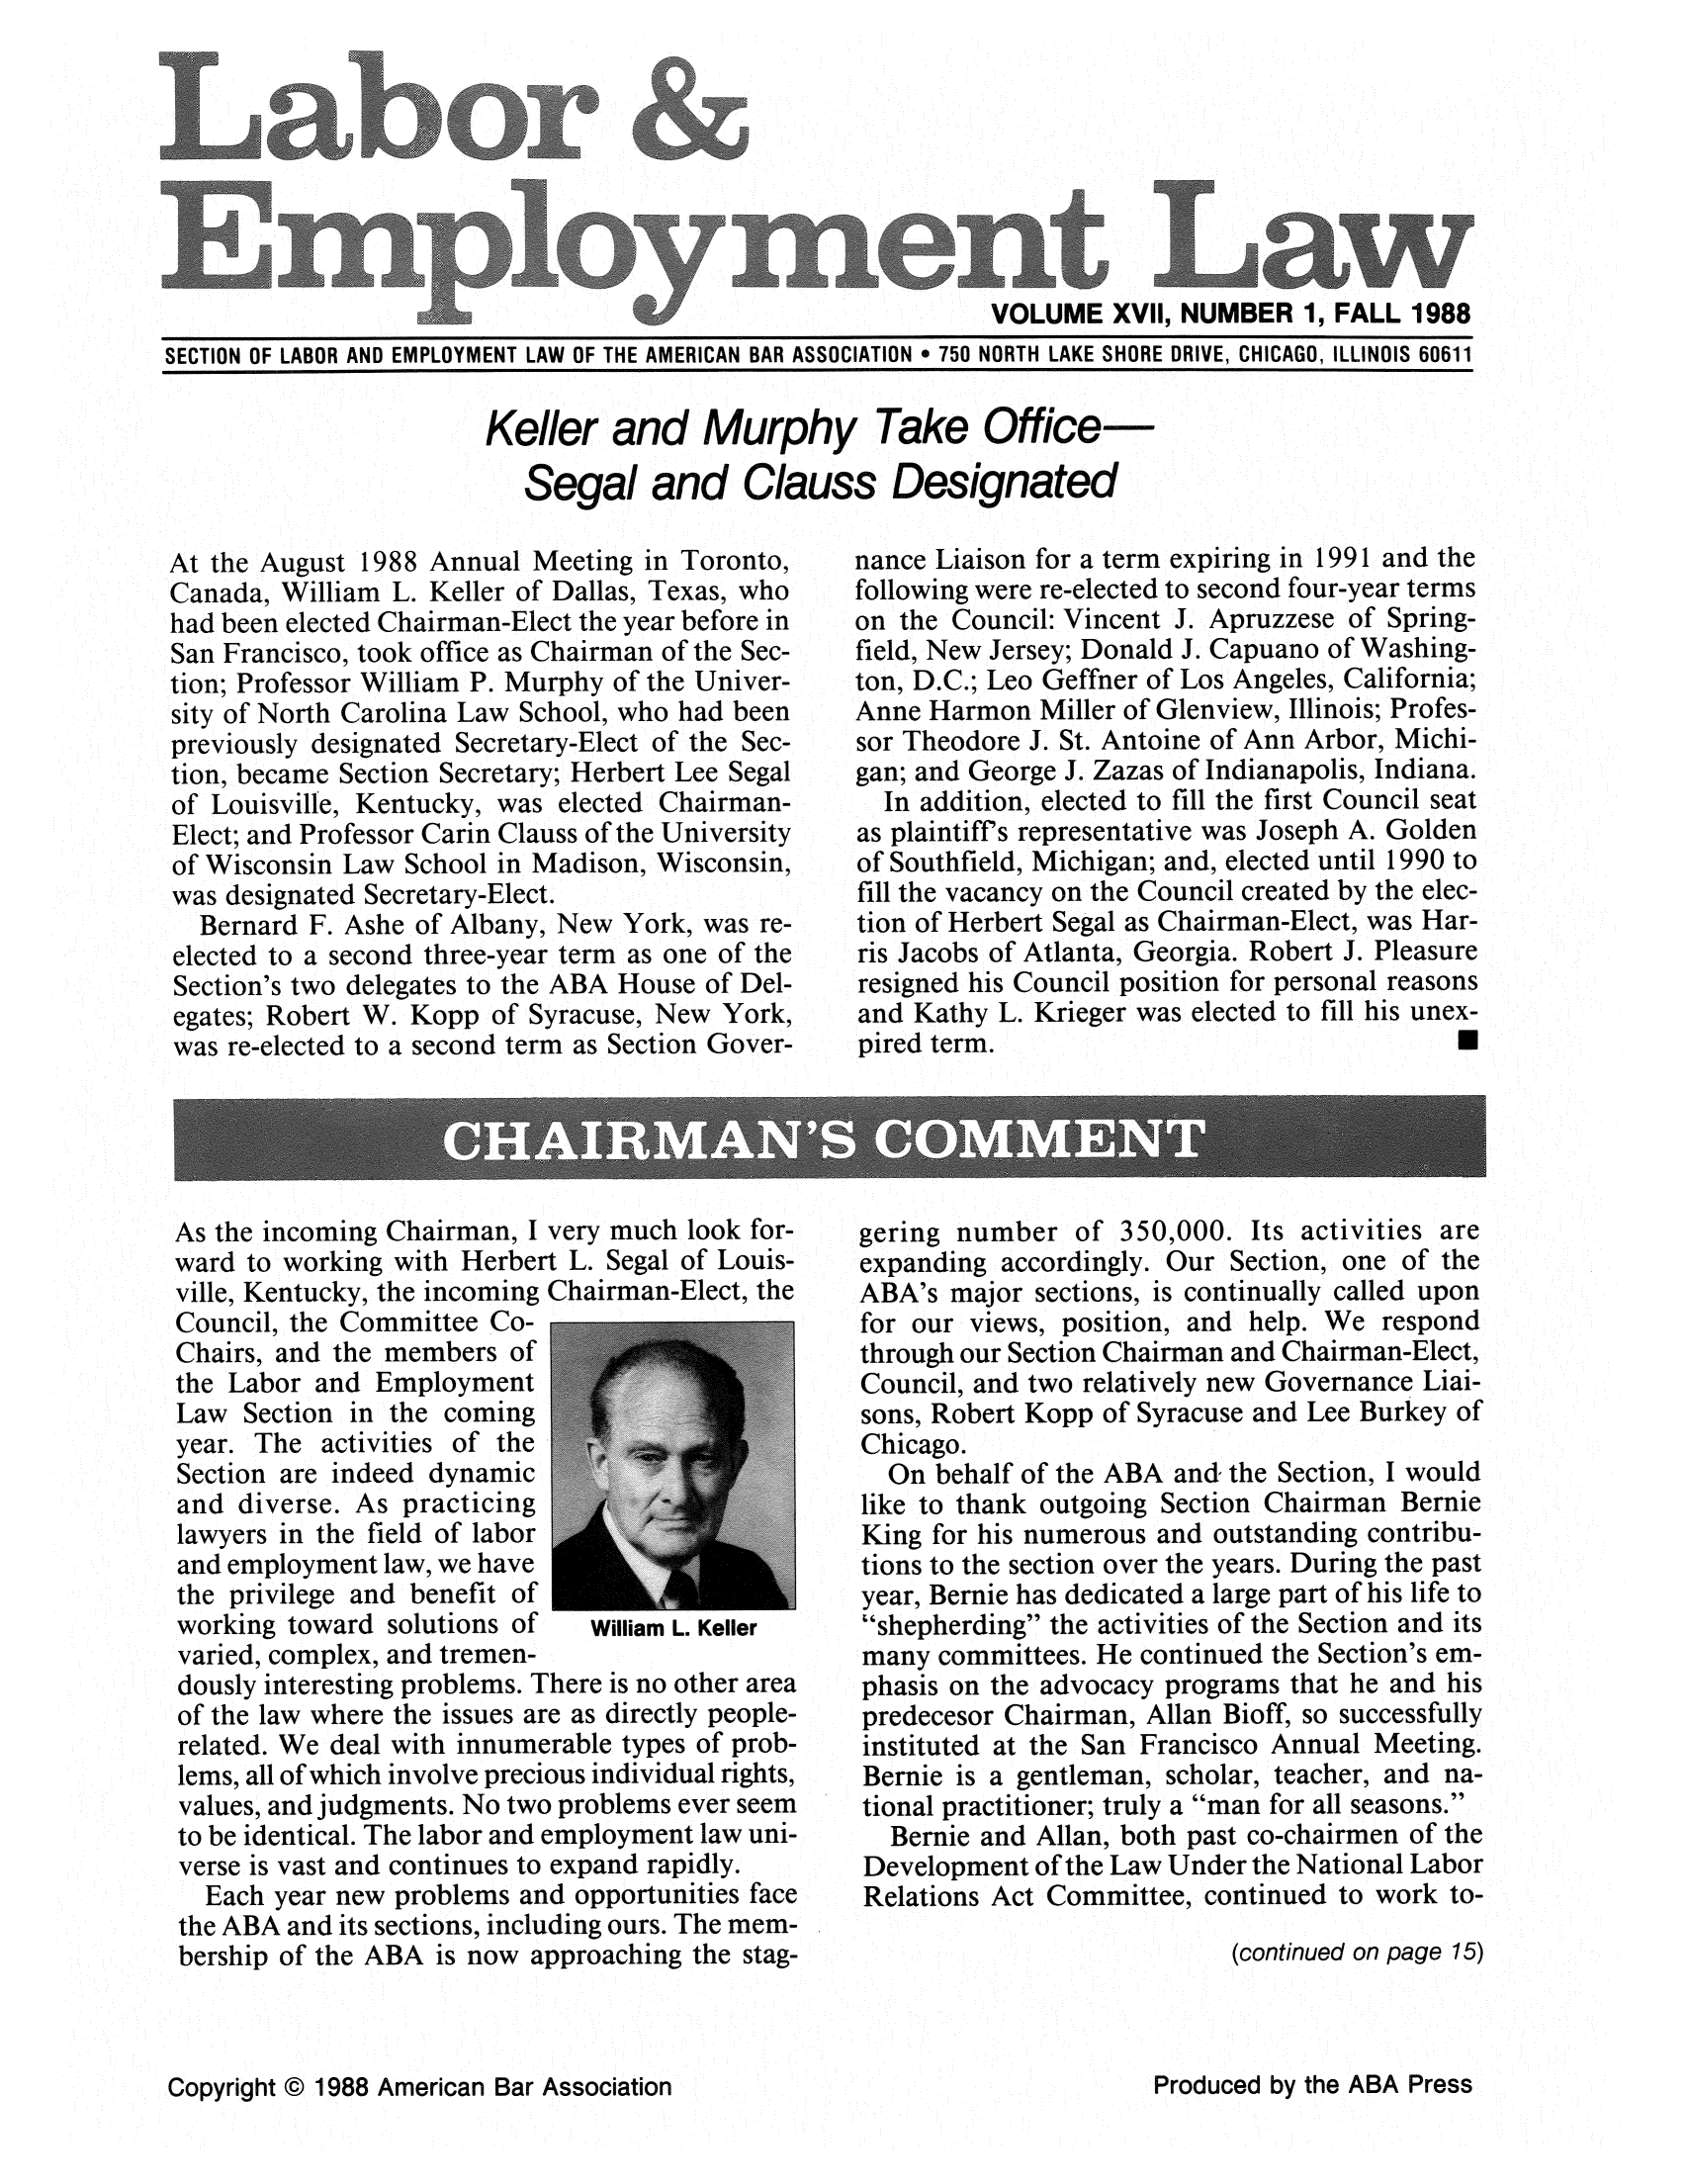 handle is hein.journals/laboemplo17 and id is 1 raw text is:                                                               VOLUME XVlI, NUMBER 1, FALL 1988SECTION OF LABOR AND EMPLOYMENT LAW OF THE AMERICAN BAR ASSOCIATION , 750 NORTH LAKE SHORE DRIVE, CHICAGO, ILLINOIS 60611Keller and Murphy Take Office   Segal and Clauss DesignatedAt the August 1988 Annual Meeting in Toronto,Canada, William L. Keller of Dallas, Texas, whohad been elected Chairman-Elect the year before inSan Francisco, took office as Chairman of the Sec-tion; Professor William P. Murphy of the Univer-sity of North Carolina Law School, who had beenpreviously designated Secretary-Elect of the Sec-tion, became Section Secretary; Herbert Lee Segalof Louisville, Kentucky, was elected Chairman-Elect; and Professor Carin Clauss of the Universityof Wisconsin Law School in Madison, Wisconsin,was designated Secretary-Elect.  Bernard F. Ashe of Albany, New York, was re-elected to a second three-year term as one of theSection's two delegates to the ABA House of Del-egates; Robert W. Kopp of Syracuse, New York,was re-elected to a second term as Section Gover-As the incoming Chairman, I very much look for-ward to working with Herbert L. Segal of Louis-ville, Kentucky, the incoming Chairman-Elect, theCouncil, the Committee Co-Chairs, and the members ofthe Labor and EmploymentLaw Section in the comingyear. The activities of theSection are indeed dynamicand diverse. As practicinglawyers in the field of laborand employment law, we havethe privilege and benefit ofworking toward solutions of  William L. Kellervaried, complex, and tremen-dously interesting problems. There is no other areaof the law where the issues are as directly people-related. We deal with innumerable types of prob-lems, all of which involve precious individual rights,values, and judgments. No two problems ever seemto be identical. The labor and employment law uni-verse is vast and continues to expand rapidly.  Each year new problems and opportunities facethe ABA and its sections, including ours. The mem-bership of the ABA is now approaching the stag-nance Liaison for a term expiring in 1991 and thefollowing were re-elected to second four-year termson the Council: Vincent J. Apruzzese of Spring-field, New Jersey; Donald J. Capuano of Washing-ton, D.C.; Leo Geffner of Los Angeles, California;Anne Harmon Miller of Glenview, Illinois; Profes-sor Theodore J. St. Antoine of Ann Arbor, Michi-gan; and George J. Zazas of Indianapolis, Indiana.  In addition, elected to fill the first Council seatas plaintiffs representative was Joseph A. Goldenof Southfield, Michigan; and, elected until 1990 tofill the vacancy on the Council created by the elec-tion of Herbert Segal as Chairman-Elect, was Har-ris Jacobs of Atlanta, Georgia. Robert J. Pleasureresigned his Council position for personal reasonsand Kathy L. Krieger was elected to fill his unex-pired term.                                  0gering number of 350,000. Its activities areexpanding accordingly. Our Section, one of theABA's major sections, is continually called uponfor our views, position, and help. We respondthrough our Section Chairman and Chairman-Elect,Council, and two relatively new Governance Liai-sons, Robert Kopp of Syracuse and Lee Burkey ofChicago.  On behalf of the ABA and the Section, I wouldlike to thank outgoing Section Chairman BernieKing for his numerous and outstanding contribu-tions to the section over the years. During the pastyear, Bernie has dedicated a large part of his life toshepherding the activities of the Section and itsmany committees. He continued the Section's em-phasis on the advocacy programs that he and hispredecesor Chairman, Allan Bioff, so successfullyinstituted at the San Francisco Annual Meeting.Bernie is a gentleman, scholar, teacher, and na-tional practitioner; truly a man for all seasons.  Bernie and Allan, both past co-chairmen of theDevelopment of the Law Under the National LaborRelations Act Committee, continued to work to-                            (continued on page 15)Copyright © 1988 American Bar AssociationProduced by the ABA Press